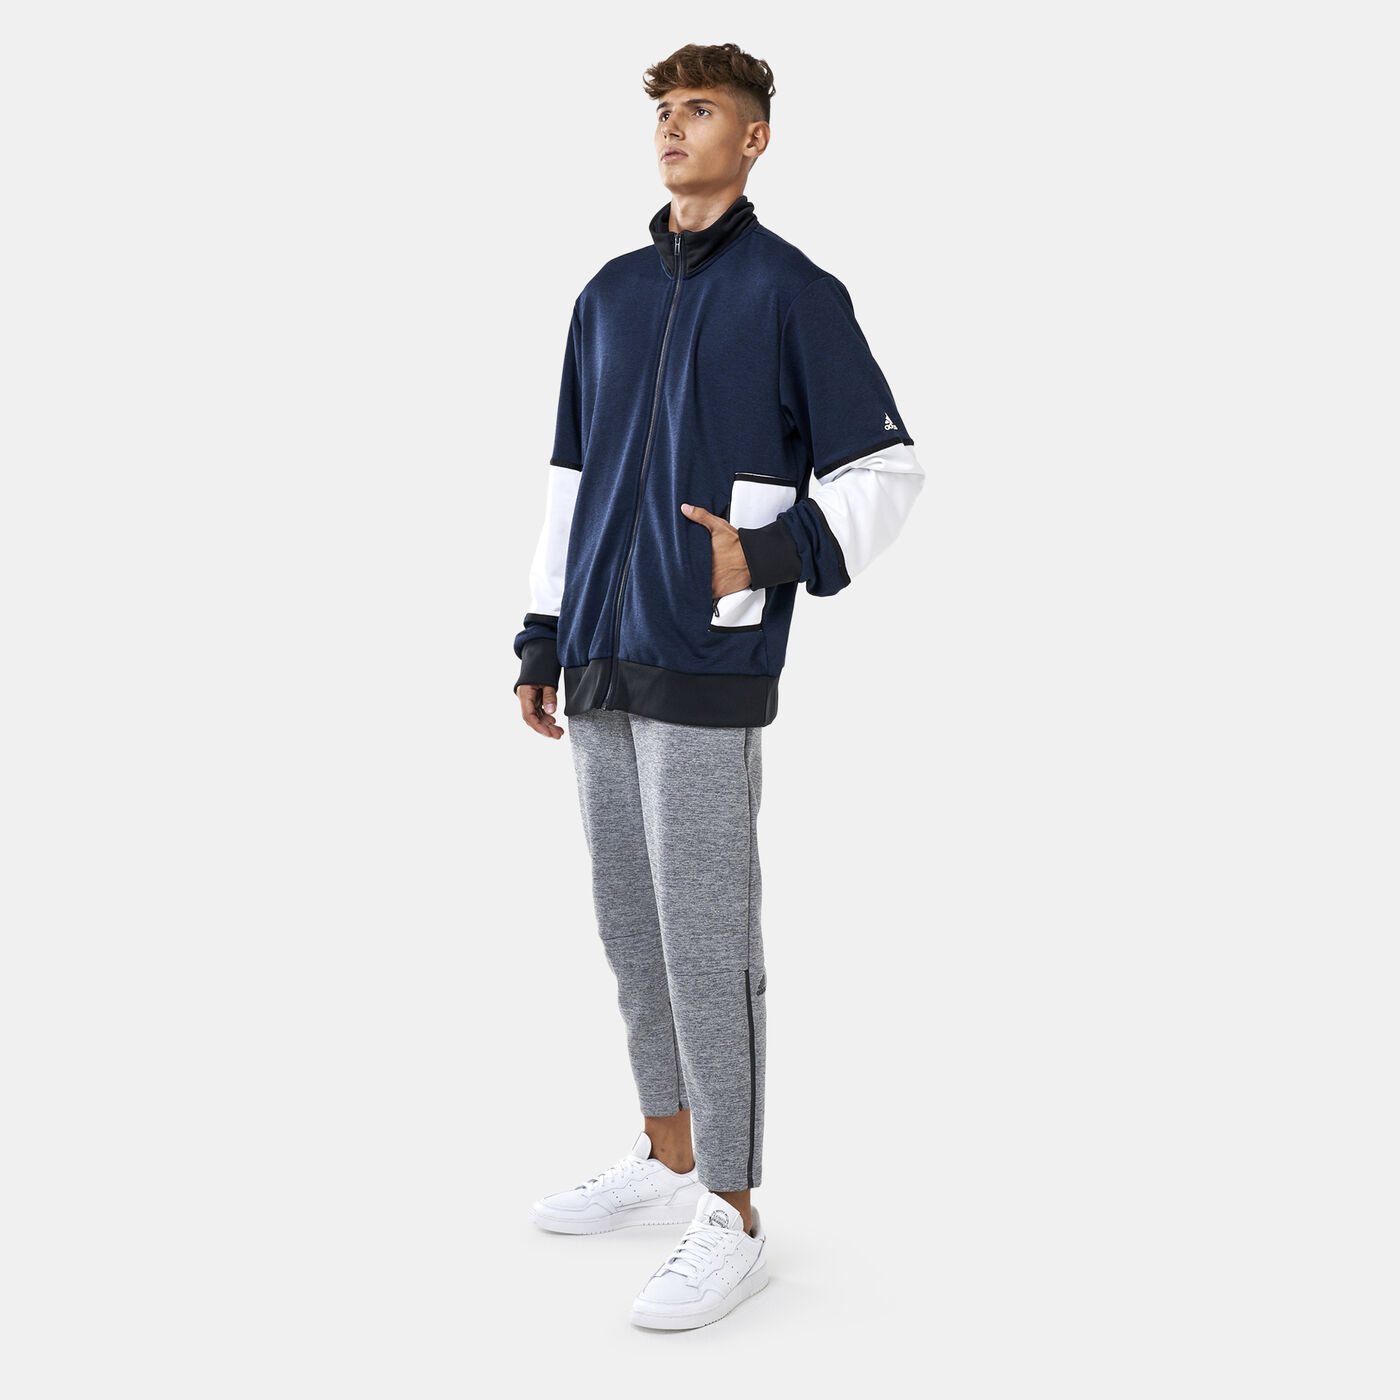 Men's Game Time Track Suit